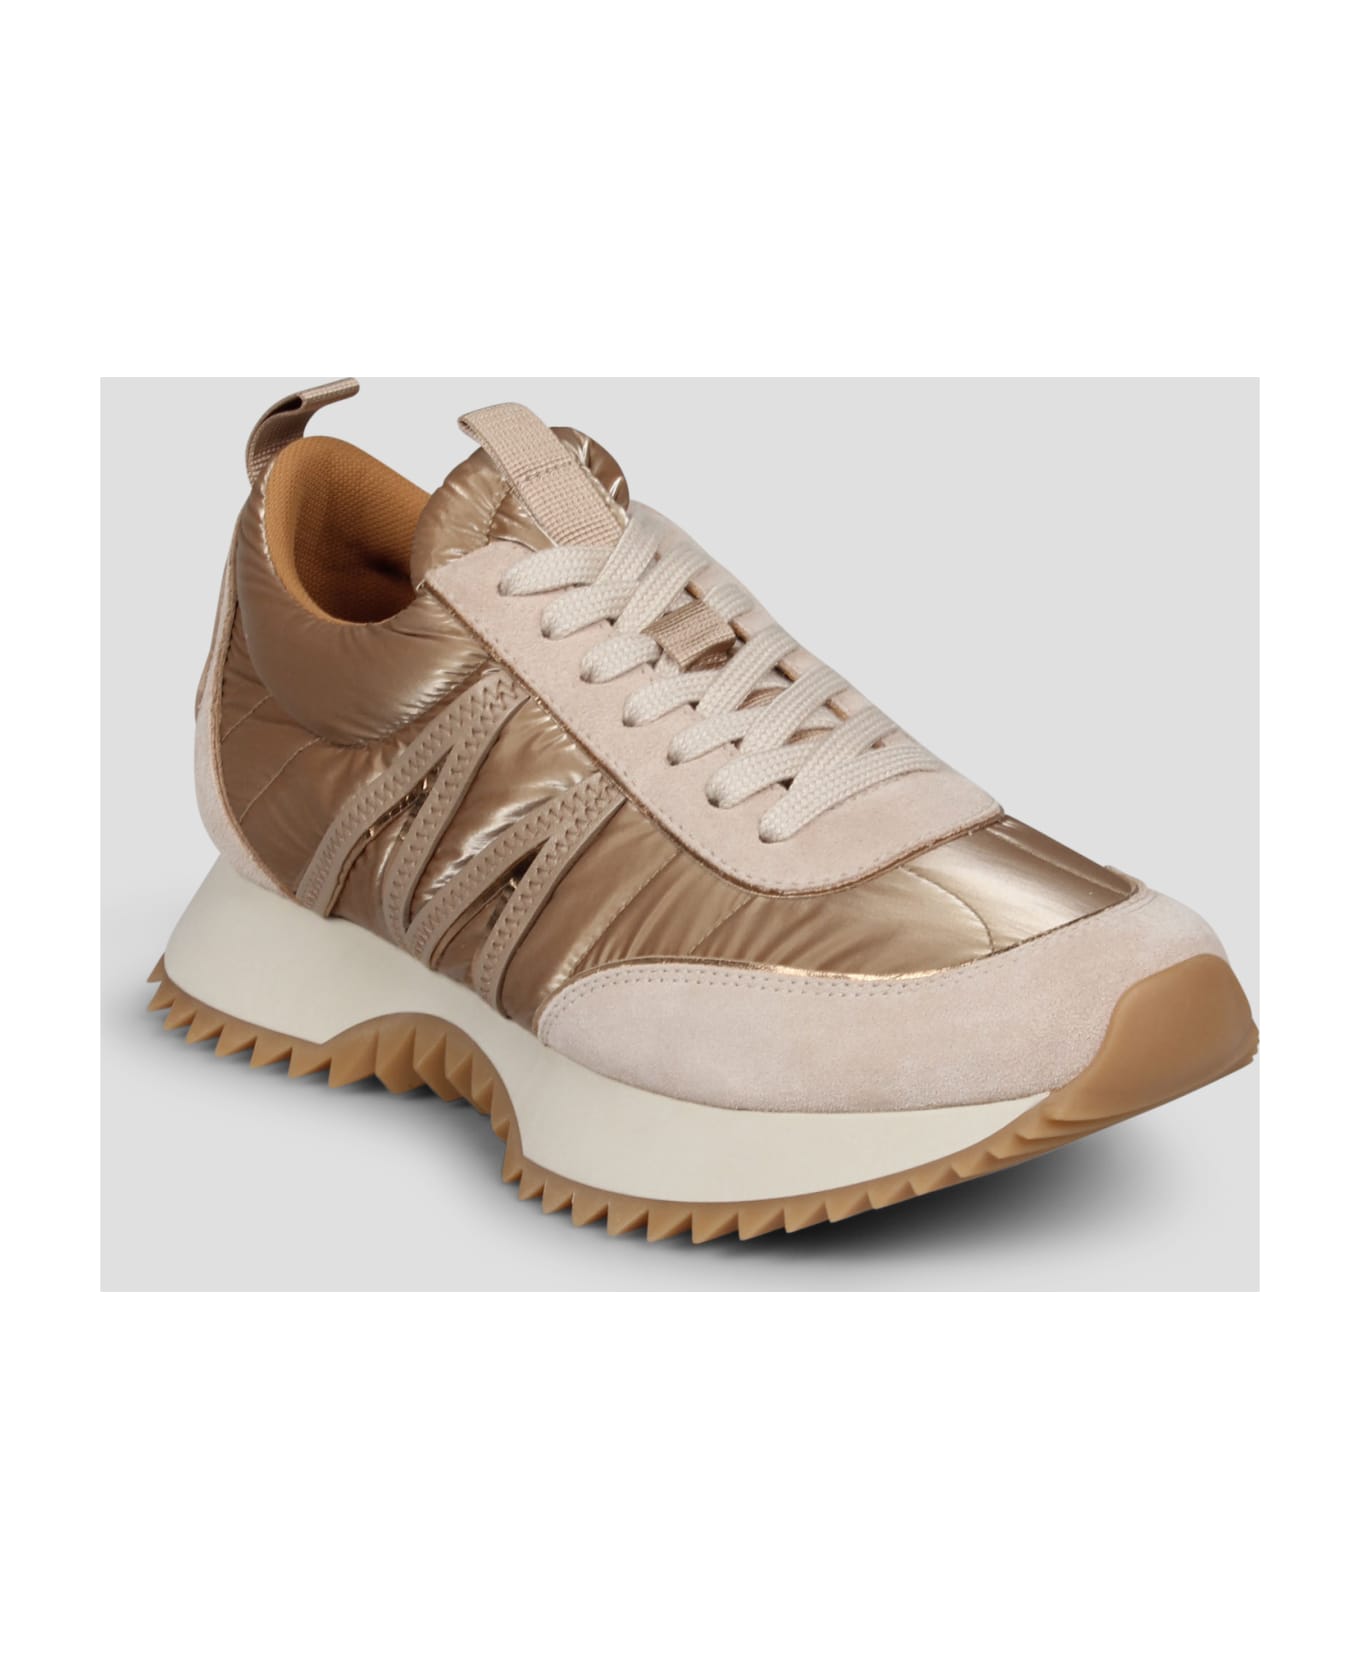 Moncler Round Toe Lace-up Sneakers - Nude & Neutrals スニーカー